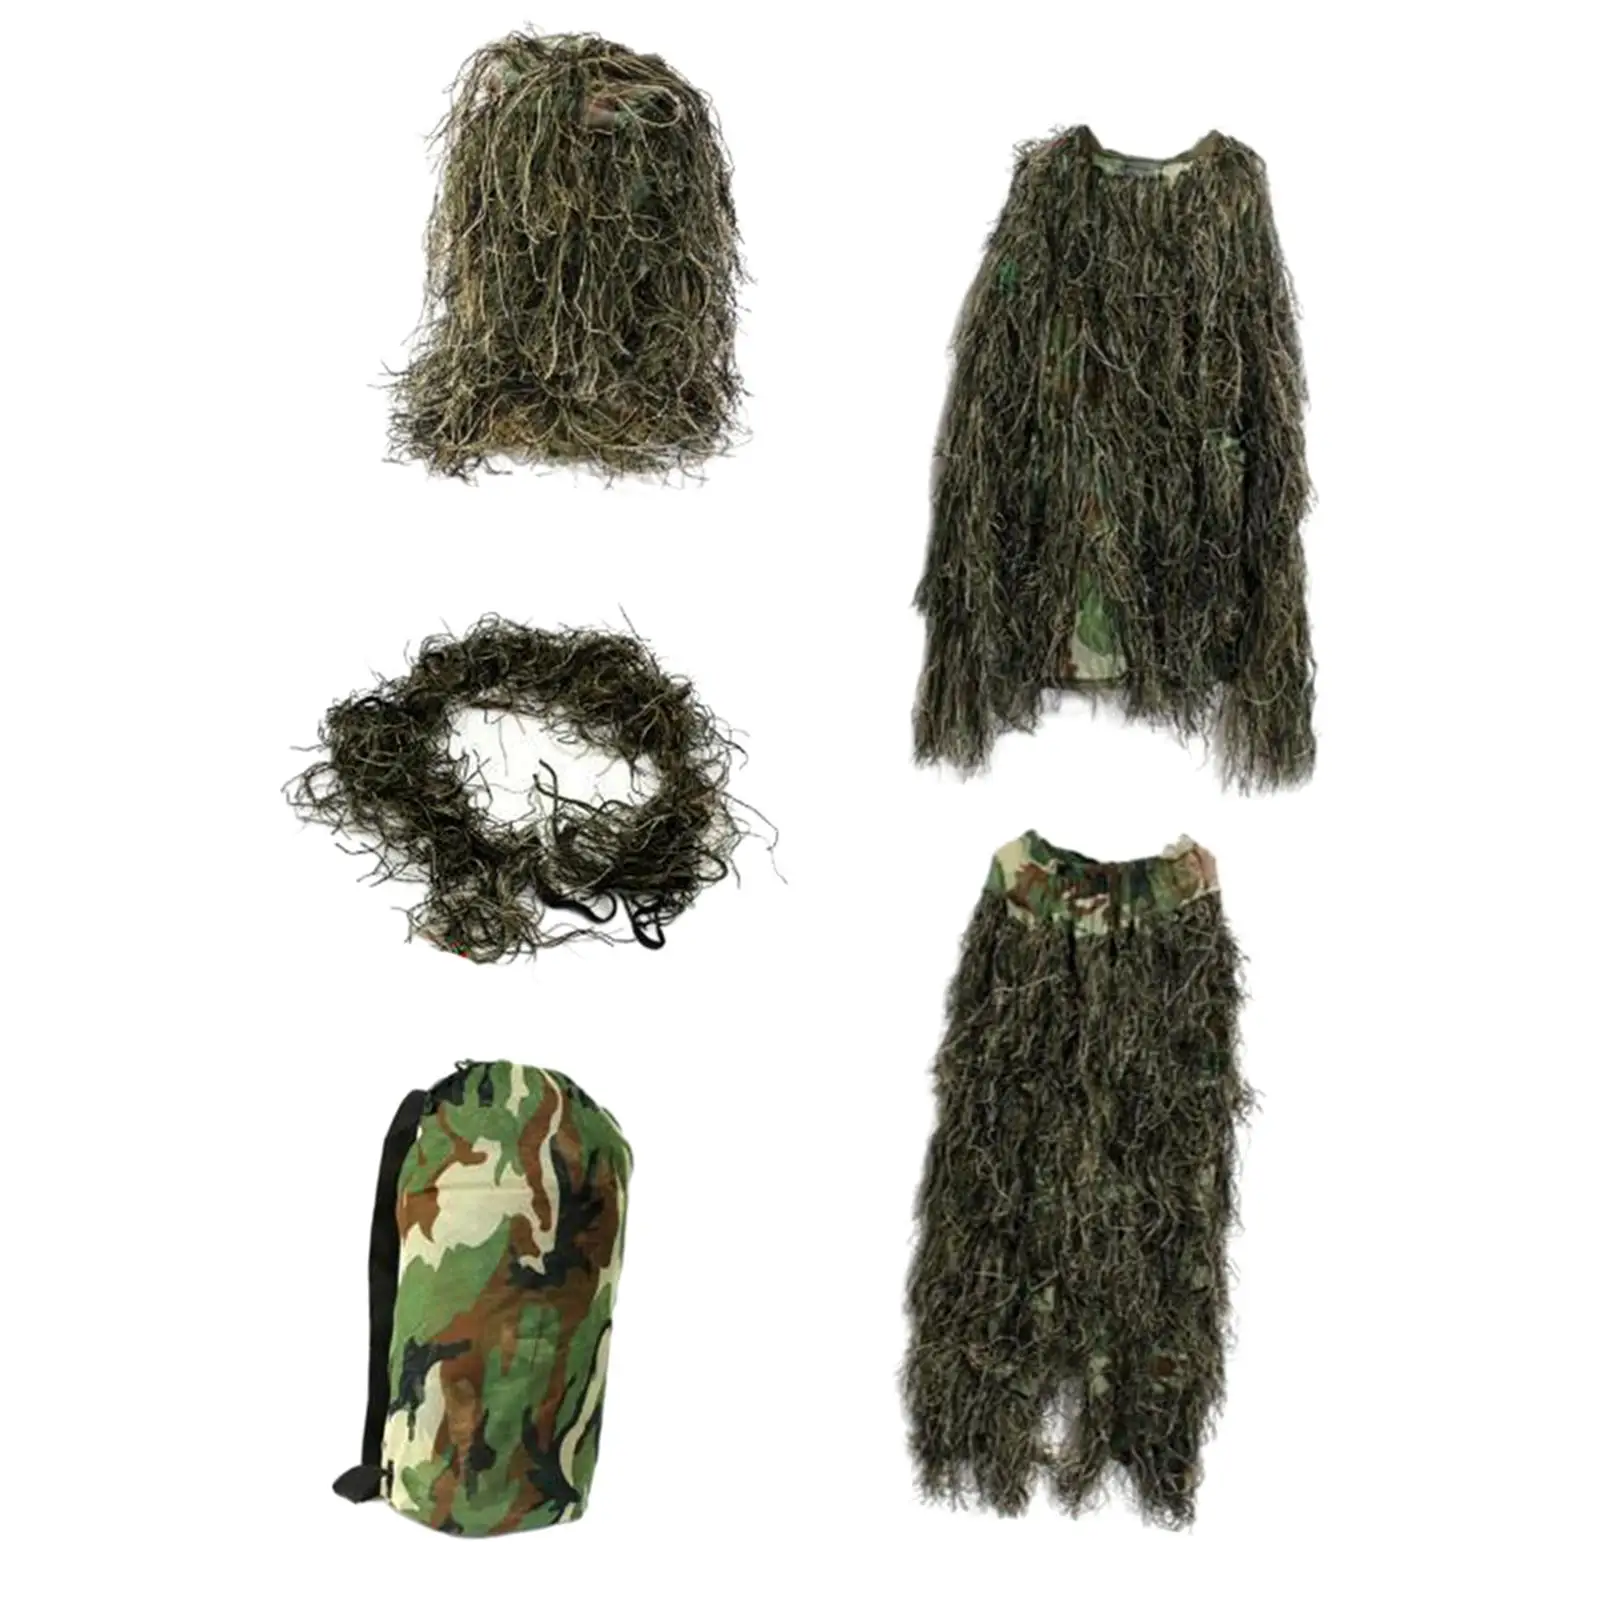 Kids Ghillie Suit Clothes Woodland Costume for Bird Watching Camping Jungle